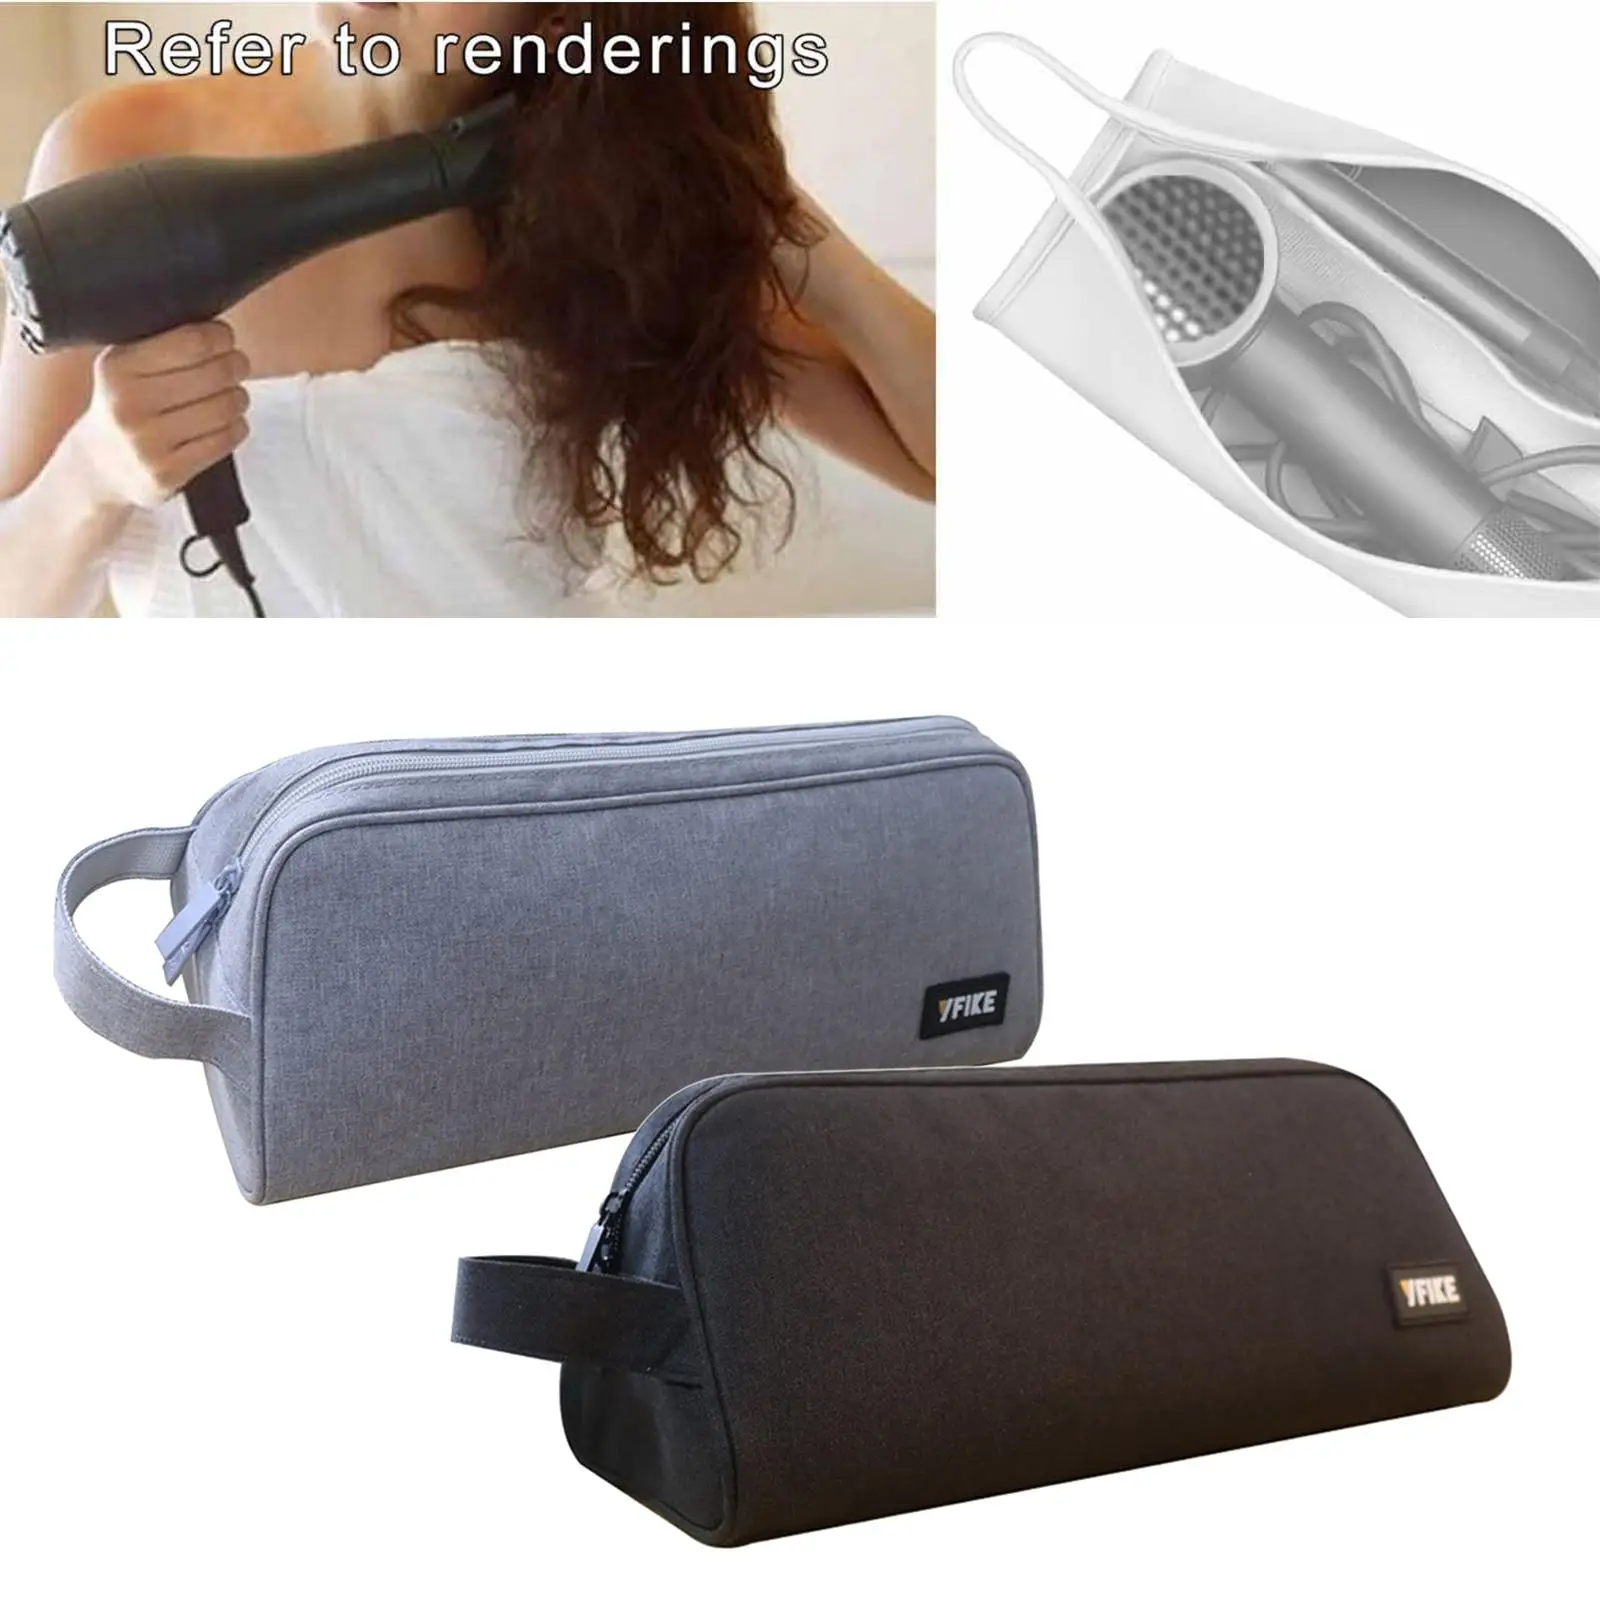 Storage Bag Anti-Scratch Cover Portable Case for Bathroom Dyson Curling Iron